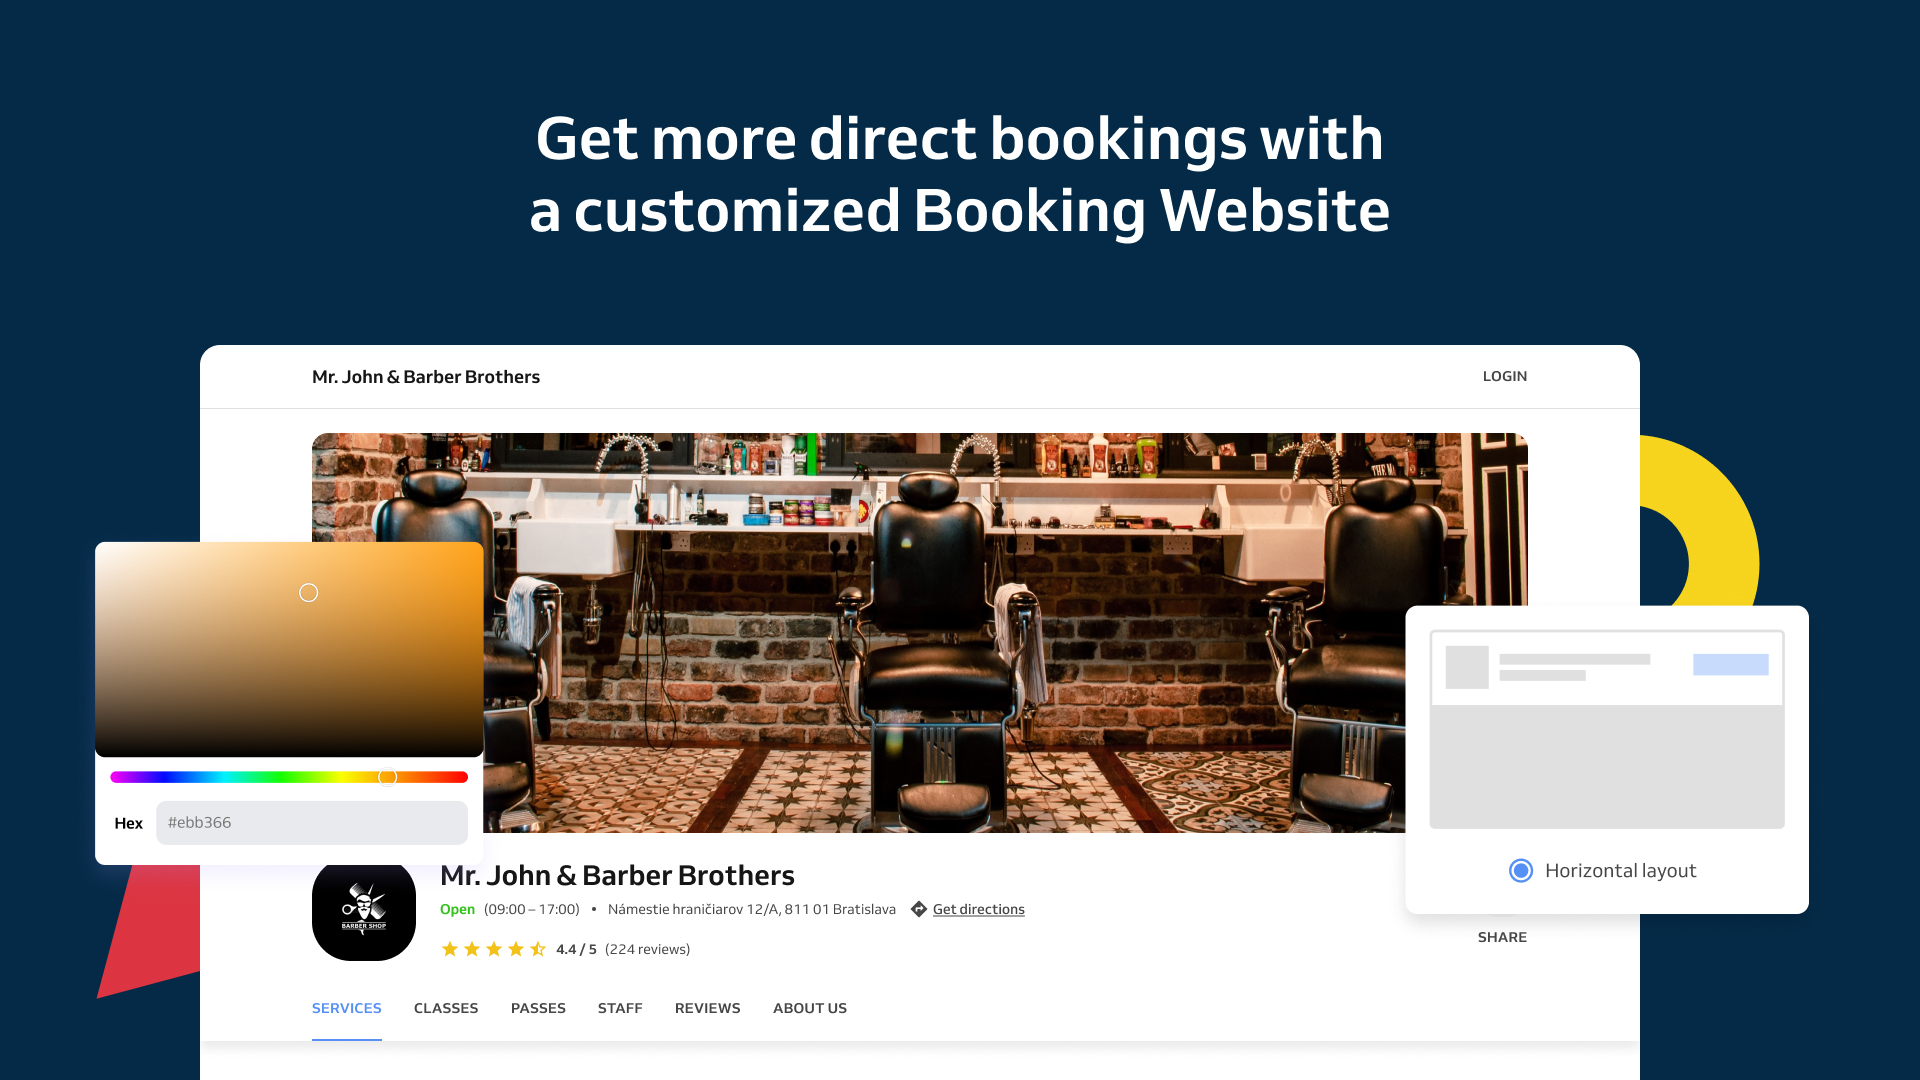 Get more direct bookings with a customized Booking Website